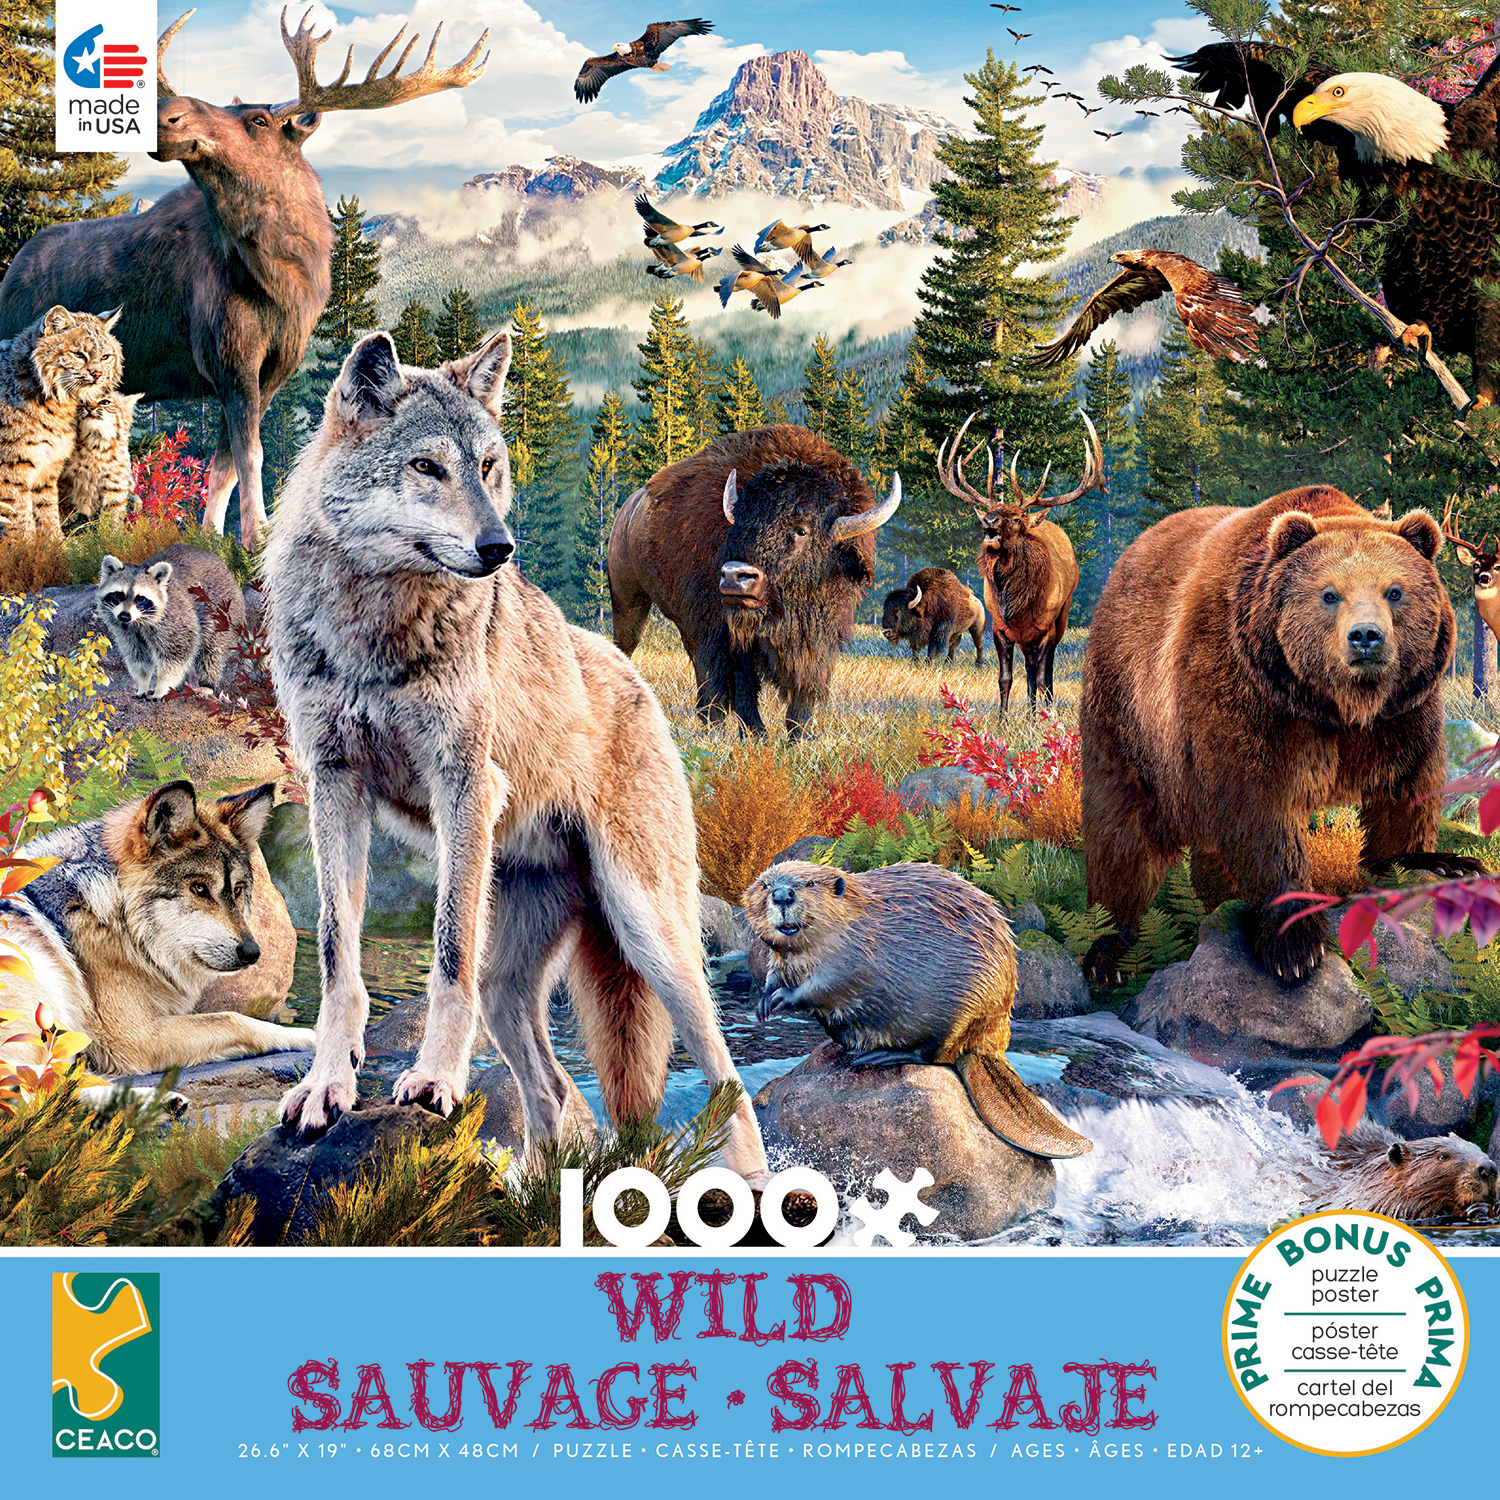 Ceaco - Wild - American Animals - 1000 Piece Jigsaw Puzzle - image 1 of 2